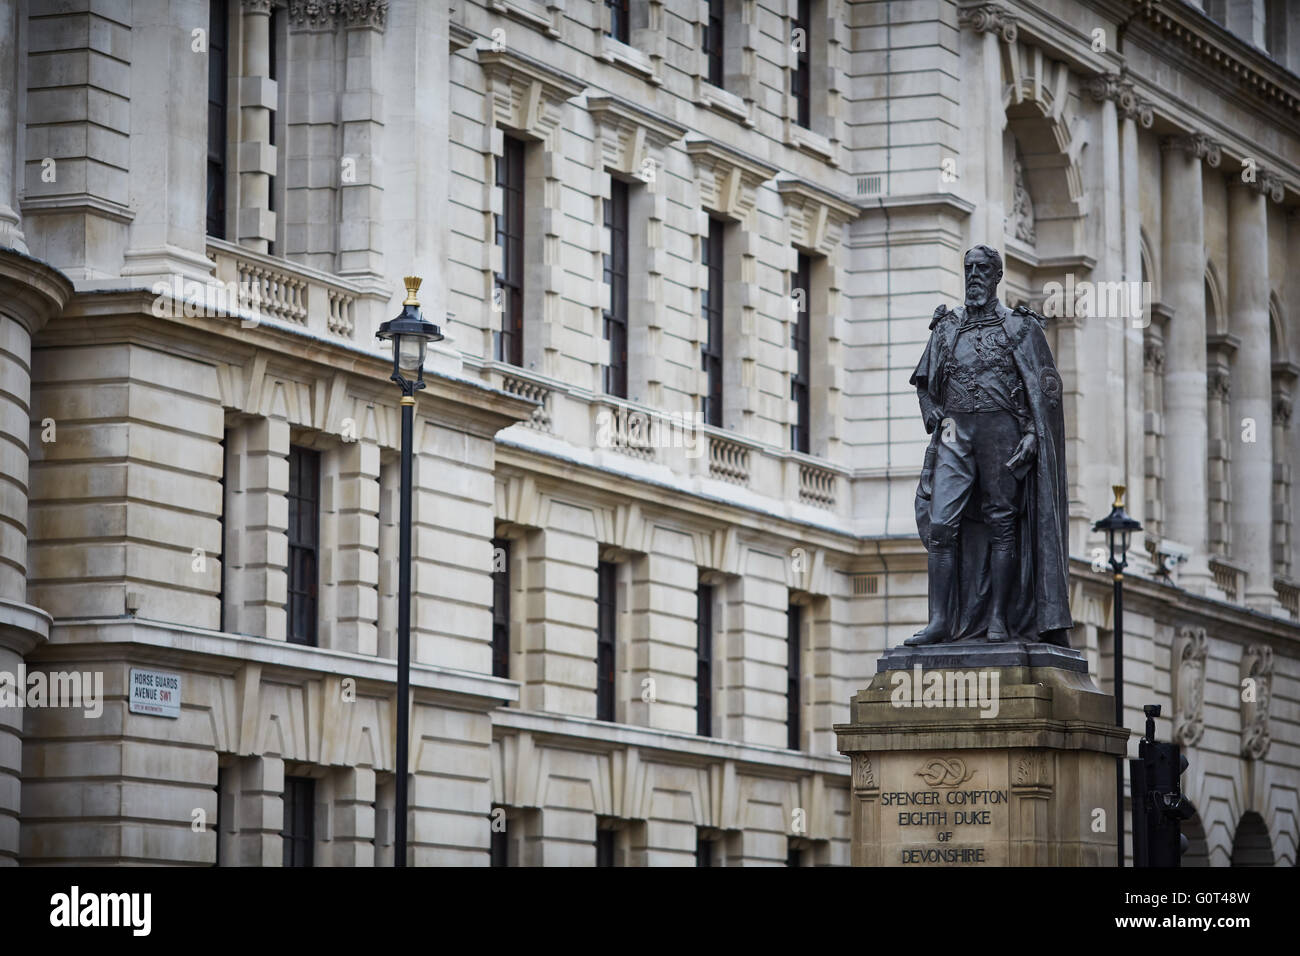 The statue of the Duke of Devonshire, Whitehall is a Grade II Listed outdoor bronze sculpture of the leader of three British pol Stock Photo